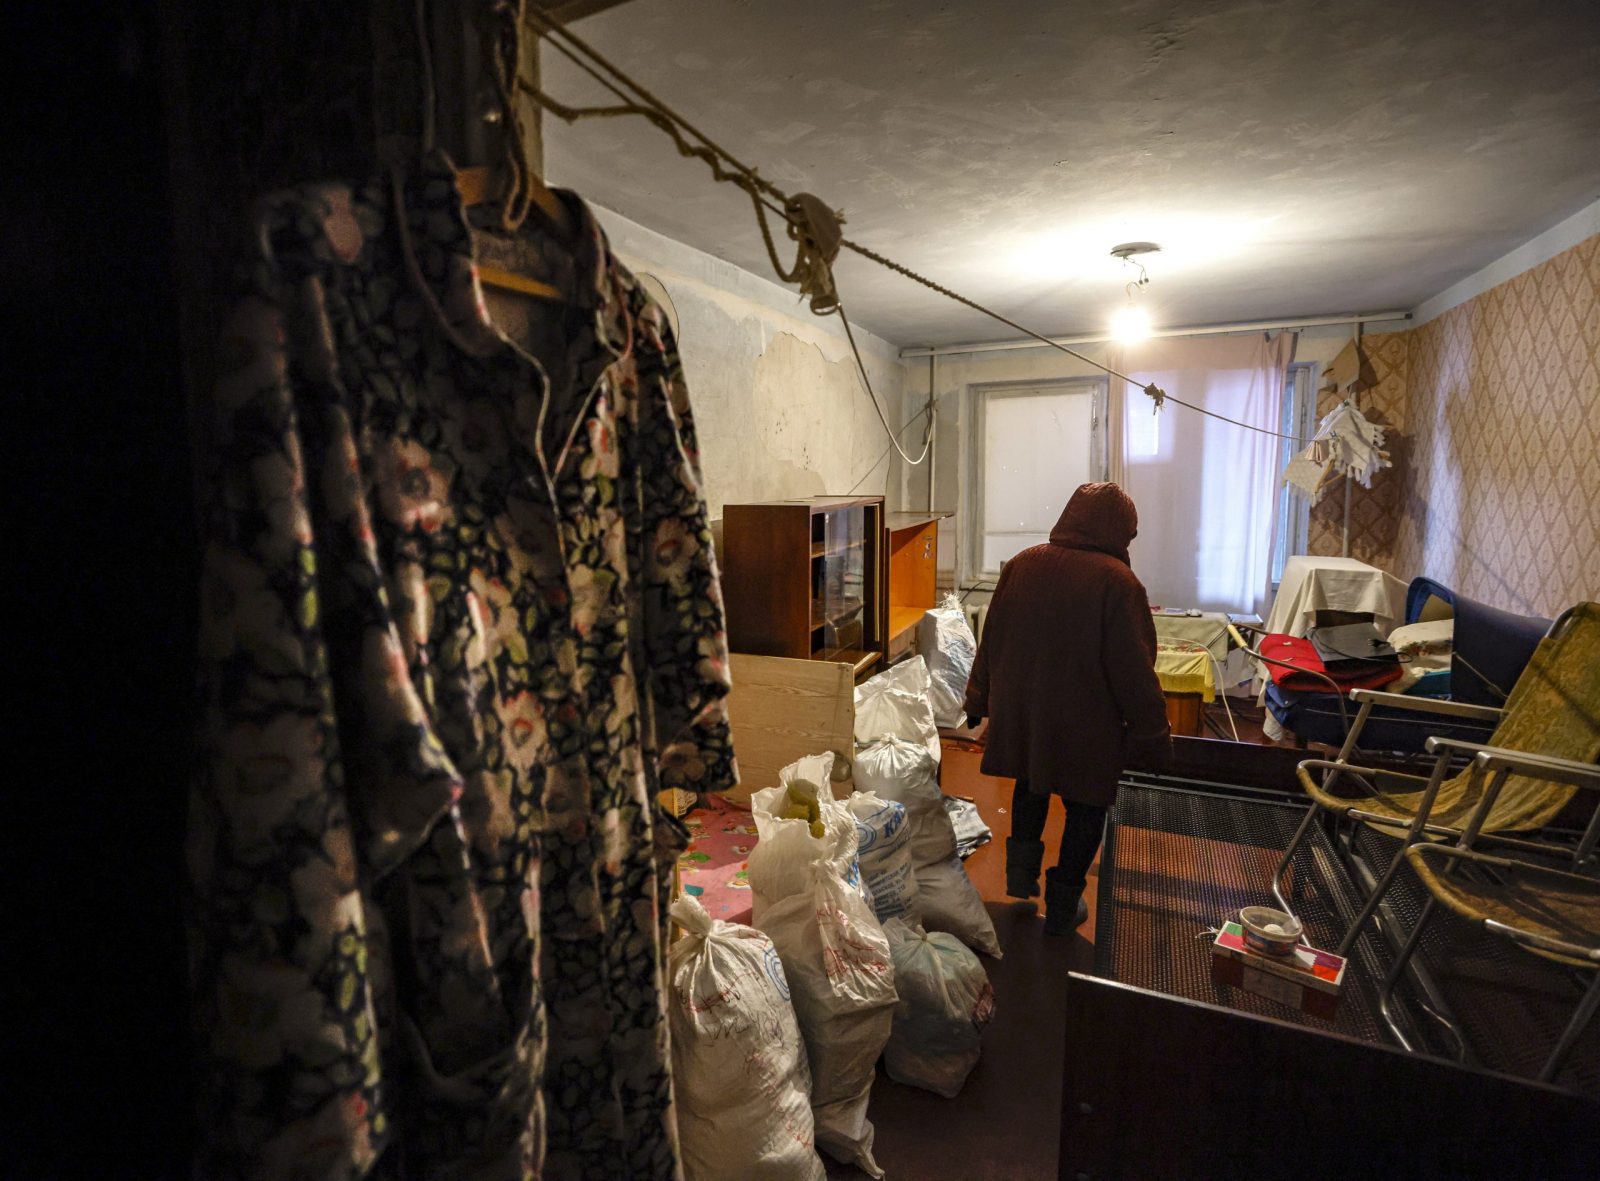 epa10354587 Mariupol resident, 76 years old Lidia, gathers goods and personal possessions before moving out of her apartment at a damaged building in Mariupol, Ukraine, 07 December 2022 (Issued 08 December 2022). Mariupol had seen a long battle for its control between the Ukrainian forces and the Russian army and Russian backed self proclaimed Donetsk People’s Republic (DPR) as well as a siege, the hostilities lasted from February to the end of May 2022 killing thousands of people and destroying most of the city in the process. A ccording to the DPR government which took control after May 2022, more than five thousand builders are currently working in Mariupol, they expect the city to be completely rebuilt in a three years time.  EPA/SERGEI ILNITSKY